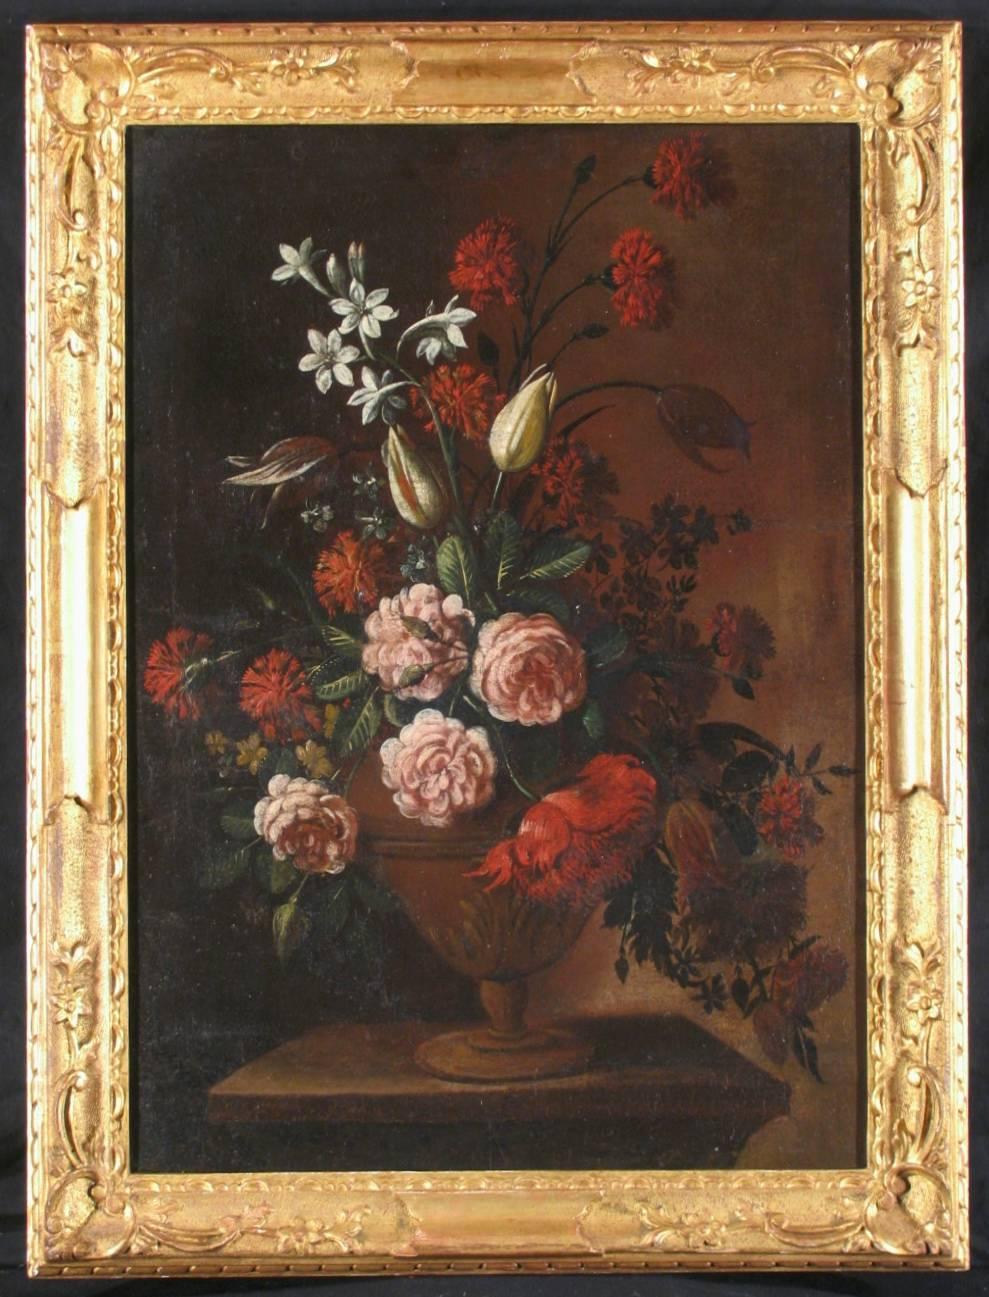 Pair of very decorative Italian Still-life paintings, unknown artist 17th-18th century, oil on canvas, lined. 